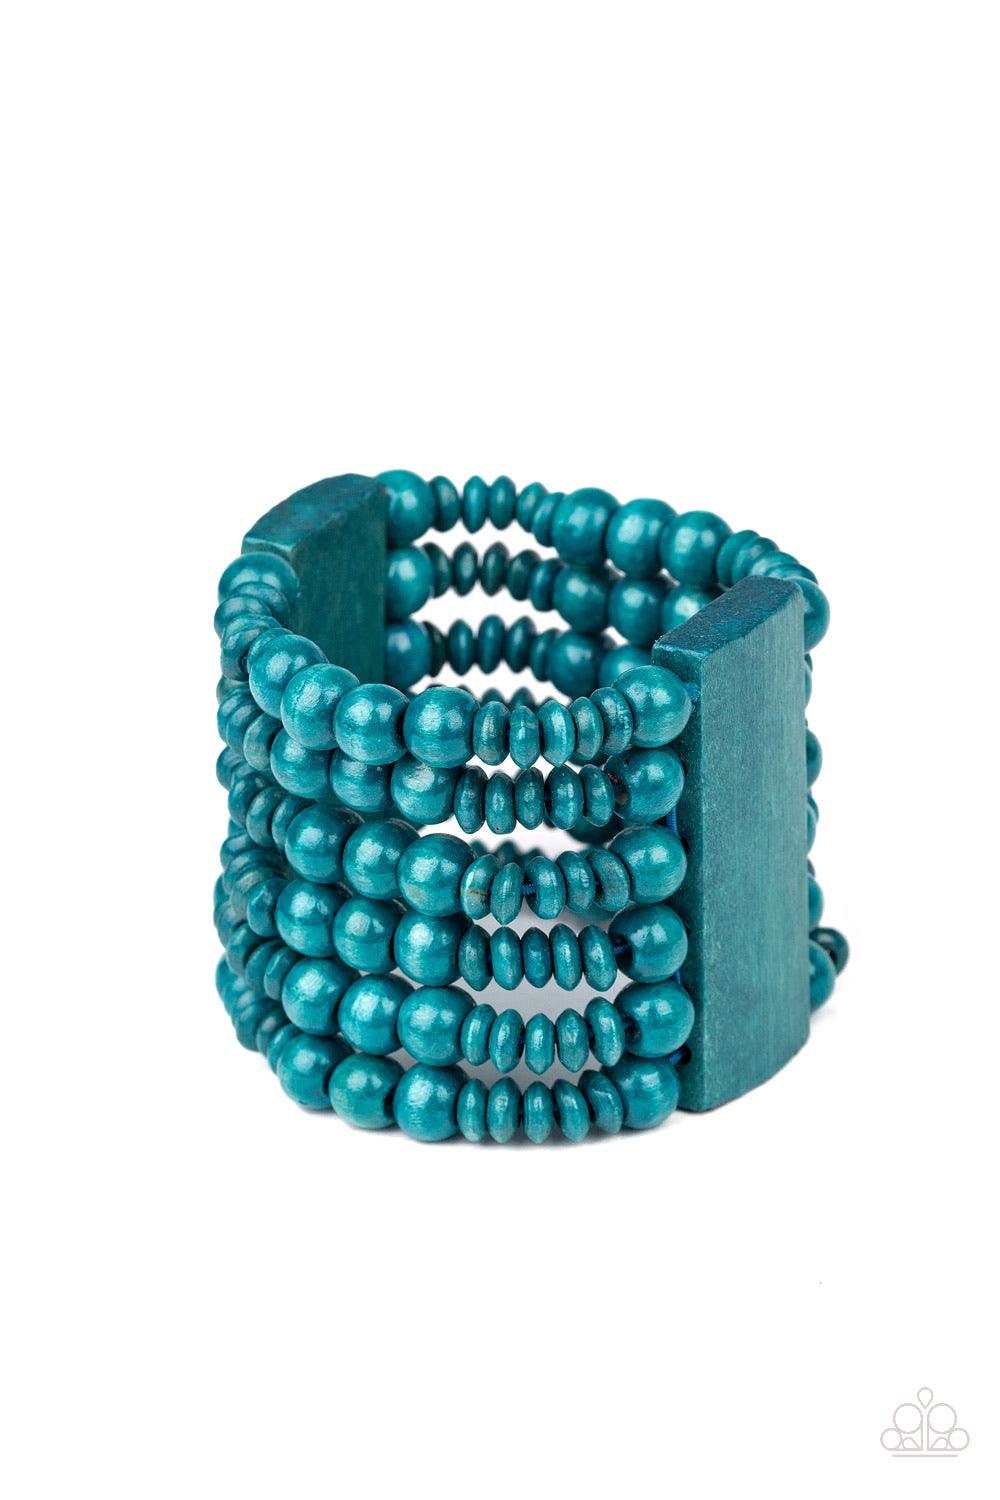 Paparazzi Accessories Don’t Stop BELIZE-ing - Blue Brushed in a refreshing blue finish, rectangular wooden frames hold together a collection of wooden beads threaded along stretchy bands, coalescing into a summery display around the wrist. Jewelry